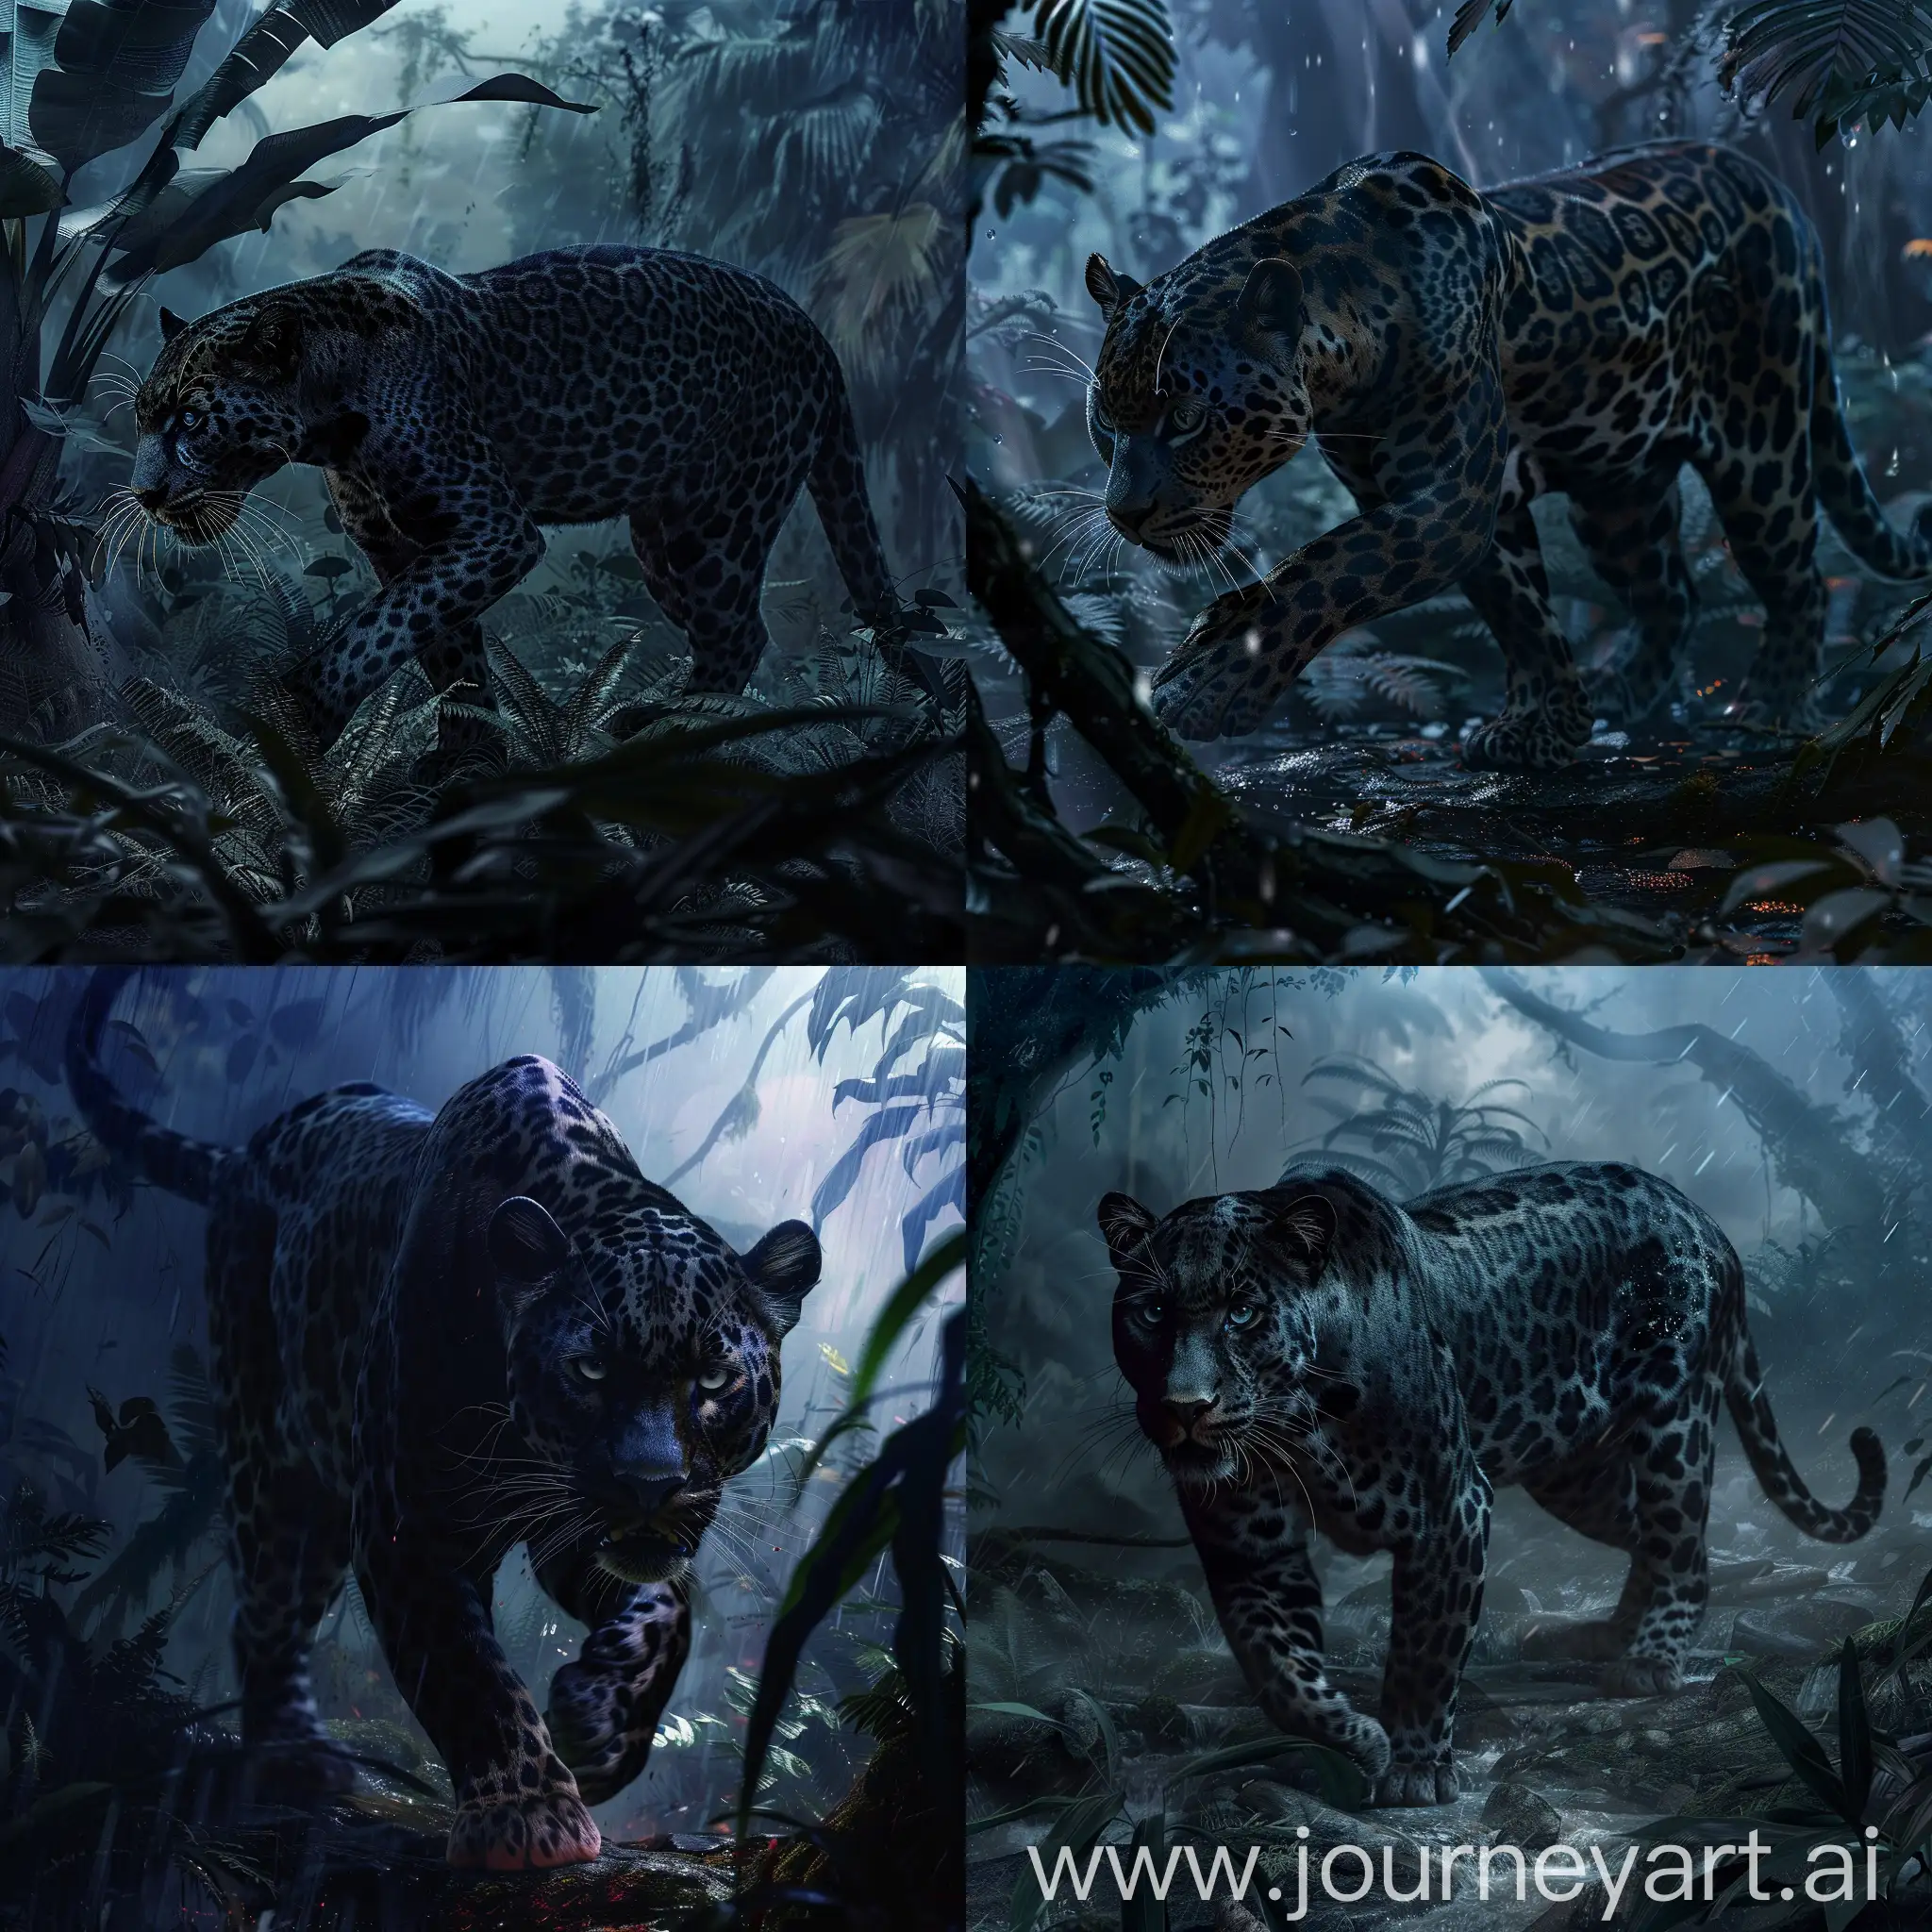 Sleek-Panther-Prowling-in-Dark-Jungle-Amid-Storm